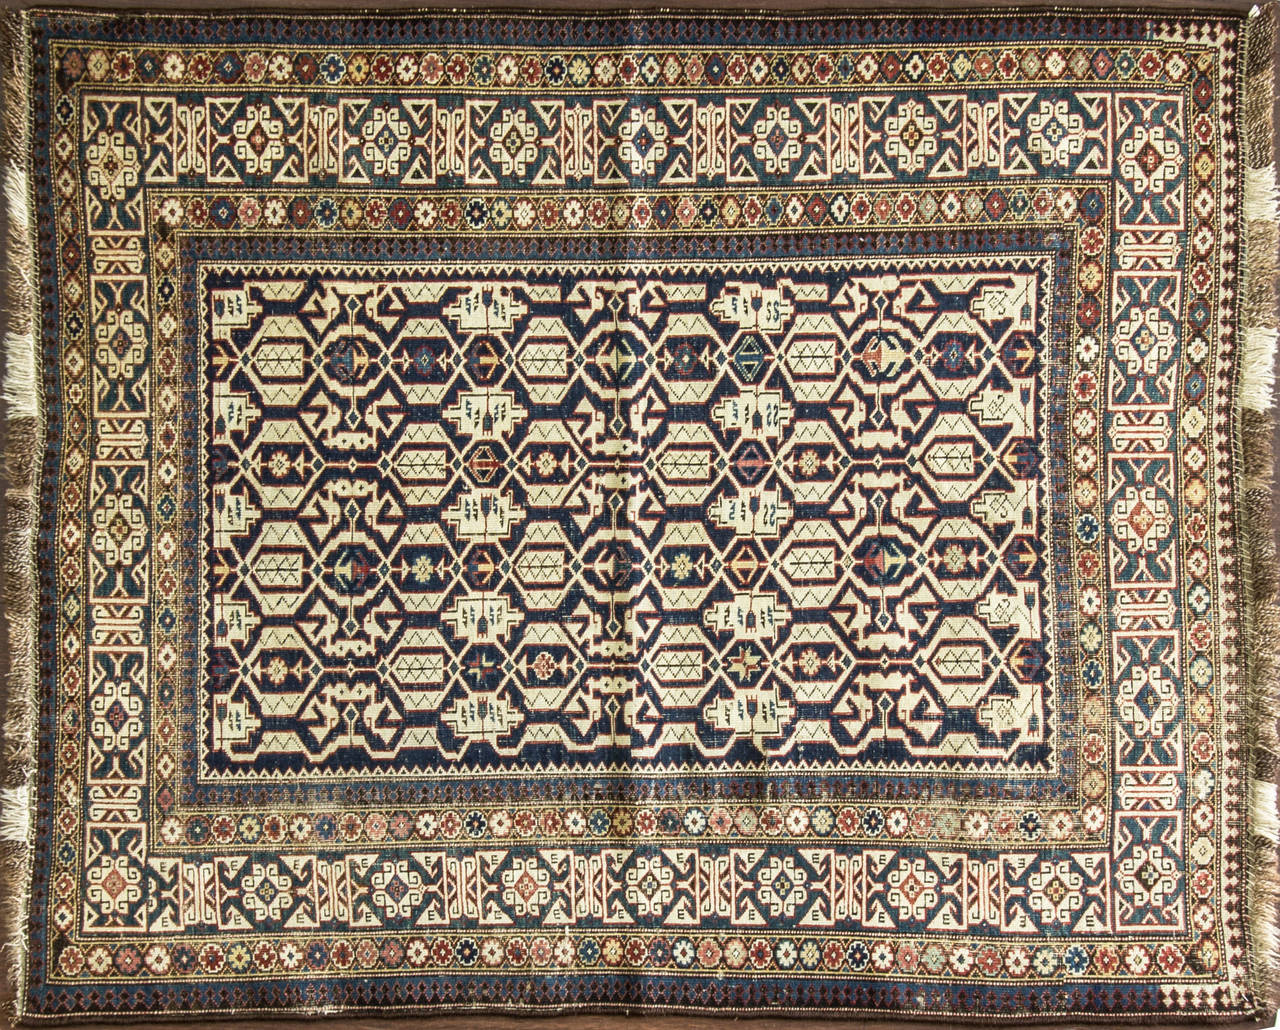 Antique Kuba (Quba is a historic Khanate or administrative district populated by the Lezghi people and Azeri Turks. Located in present-day Azerbaijan) Konaghkend Rug south Caucasus, 19th century, a geometricized white arabesque all-over field on a